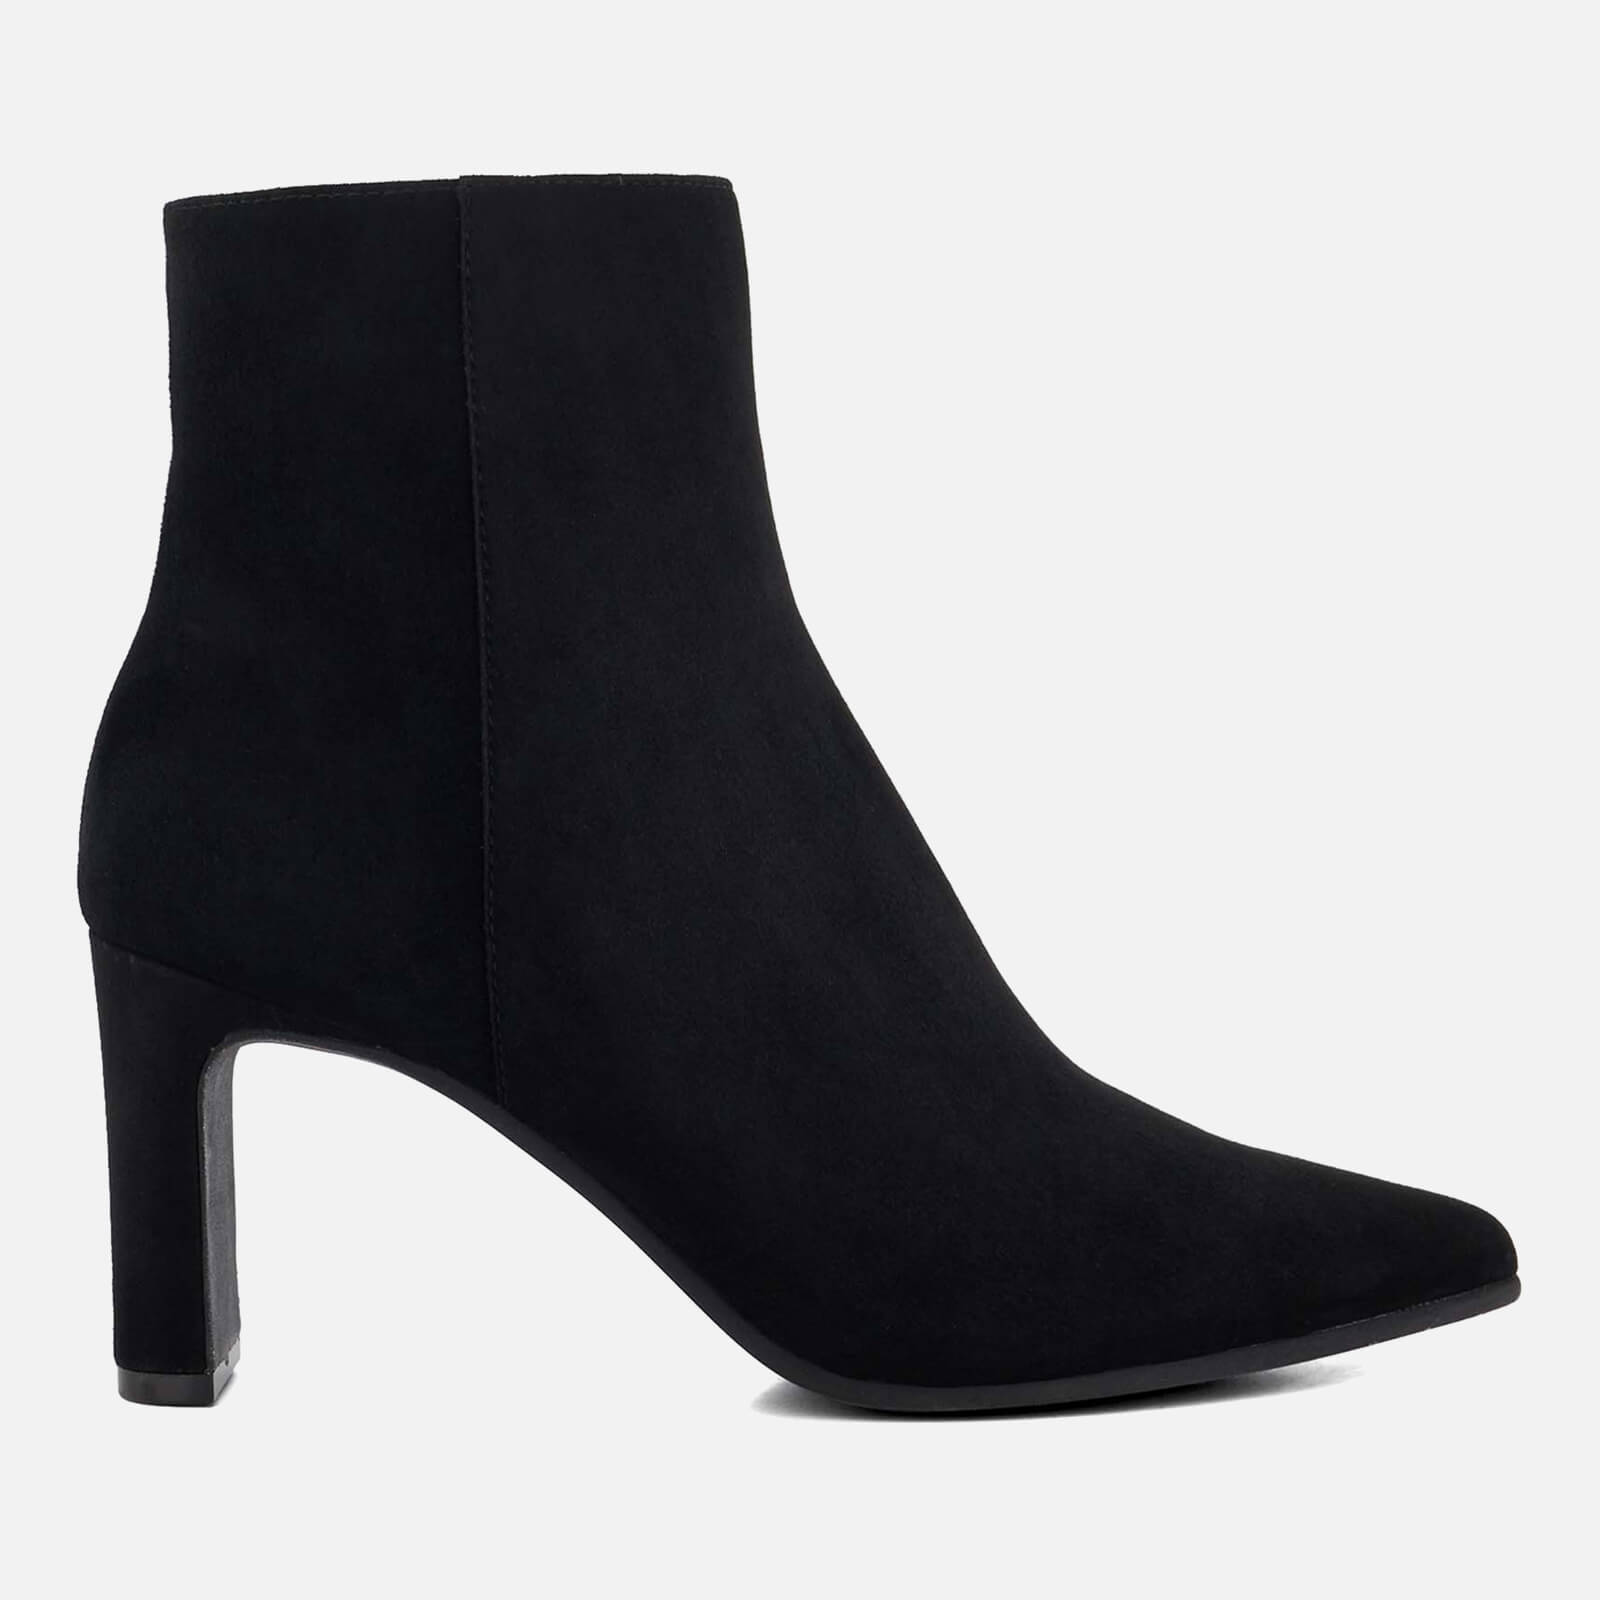 Dune Women’s Ottaly Suede Heeled Boots